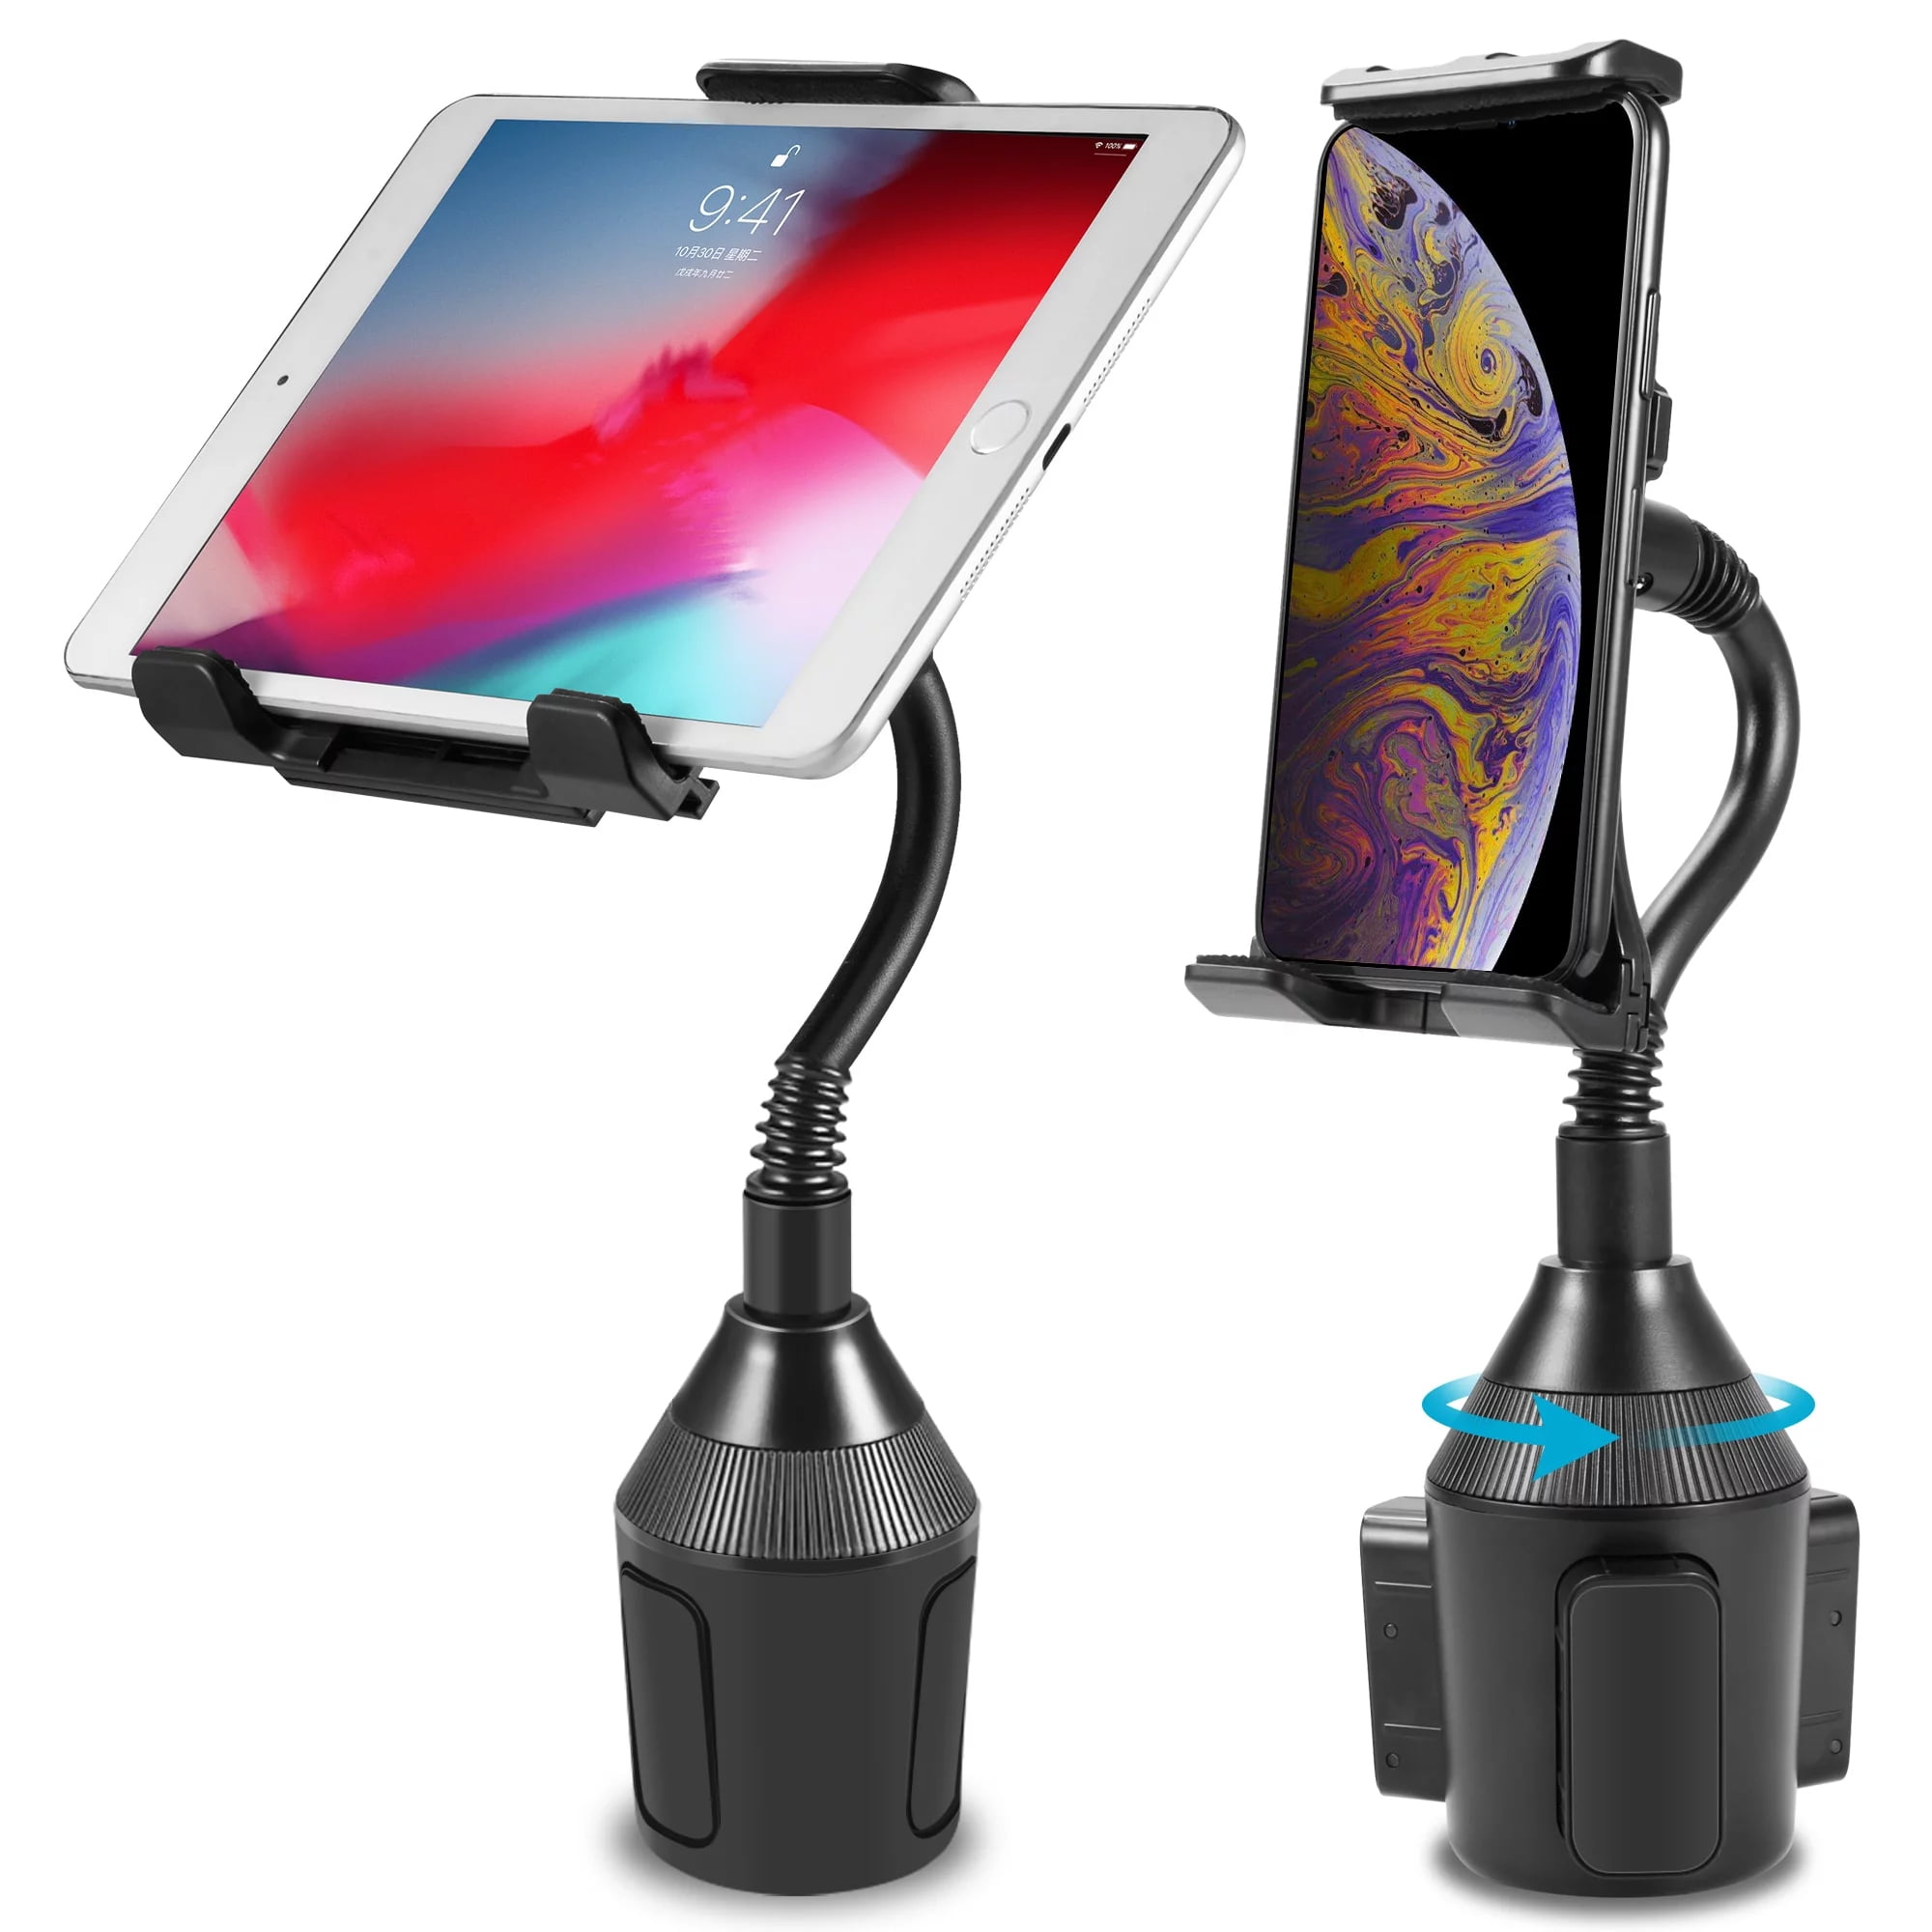 præmedicinering Visne fritid Car Mount for GPS iPhone XS,iPhone XR,iPhone 8,and iPhone 8 Plus,Cell  Phones Car Holder Adjustable Quick Release And Rotatable Mount Cup Holder  Cradle Universal Car Phone Mount for Mobile Phones GPS -